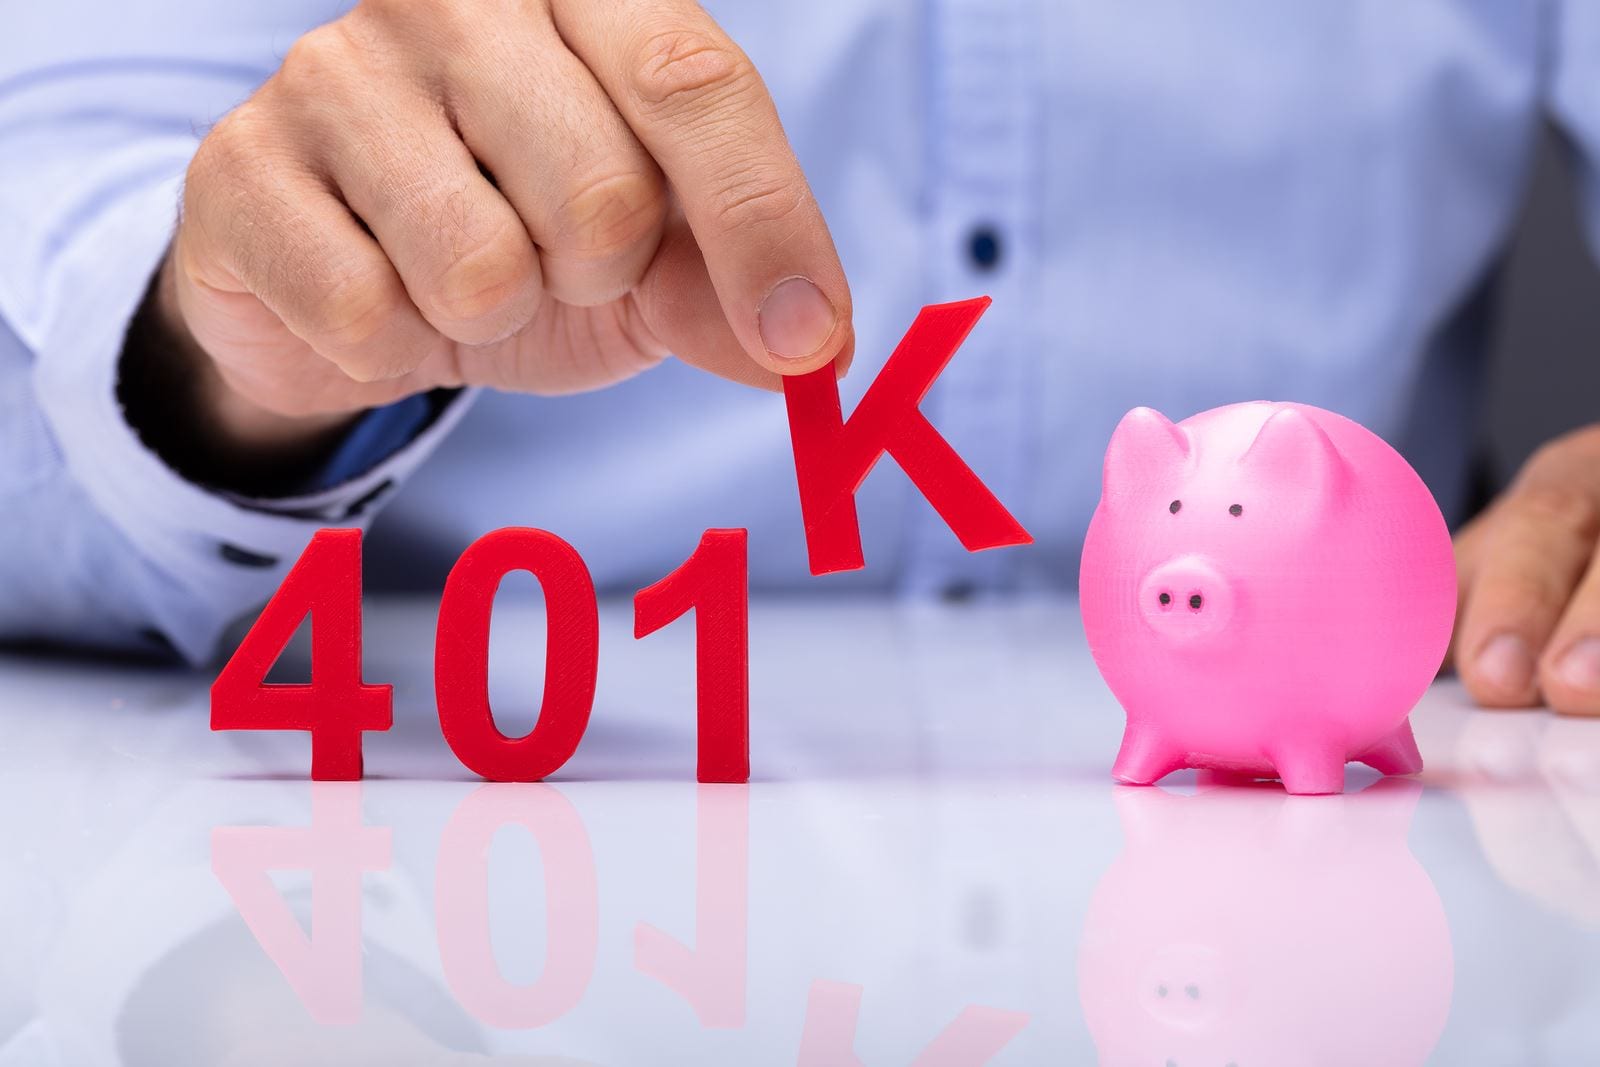 Should You Invest Your 401k in Real Estate? How?